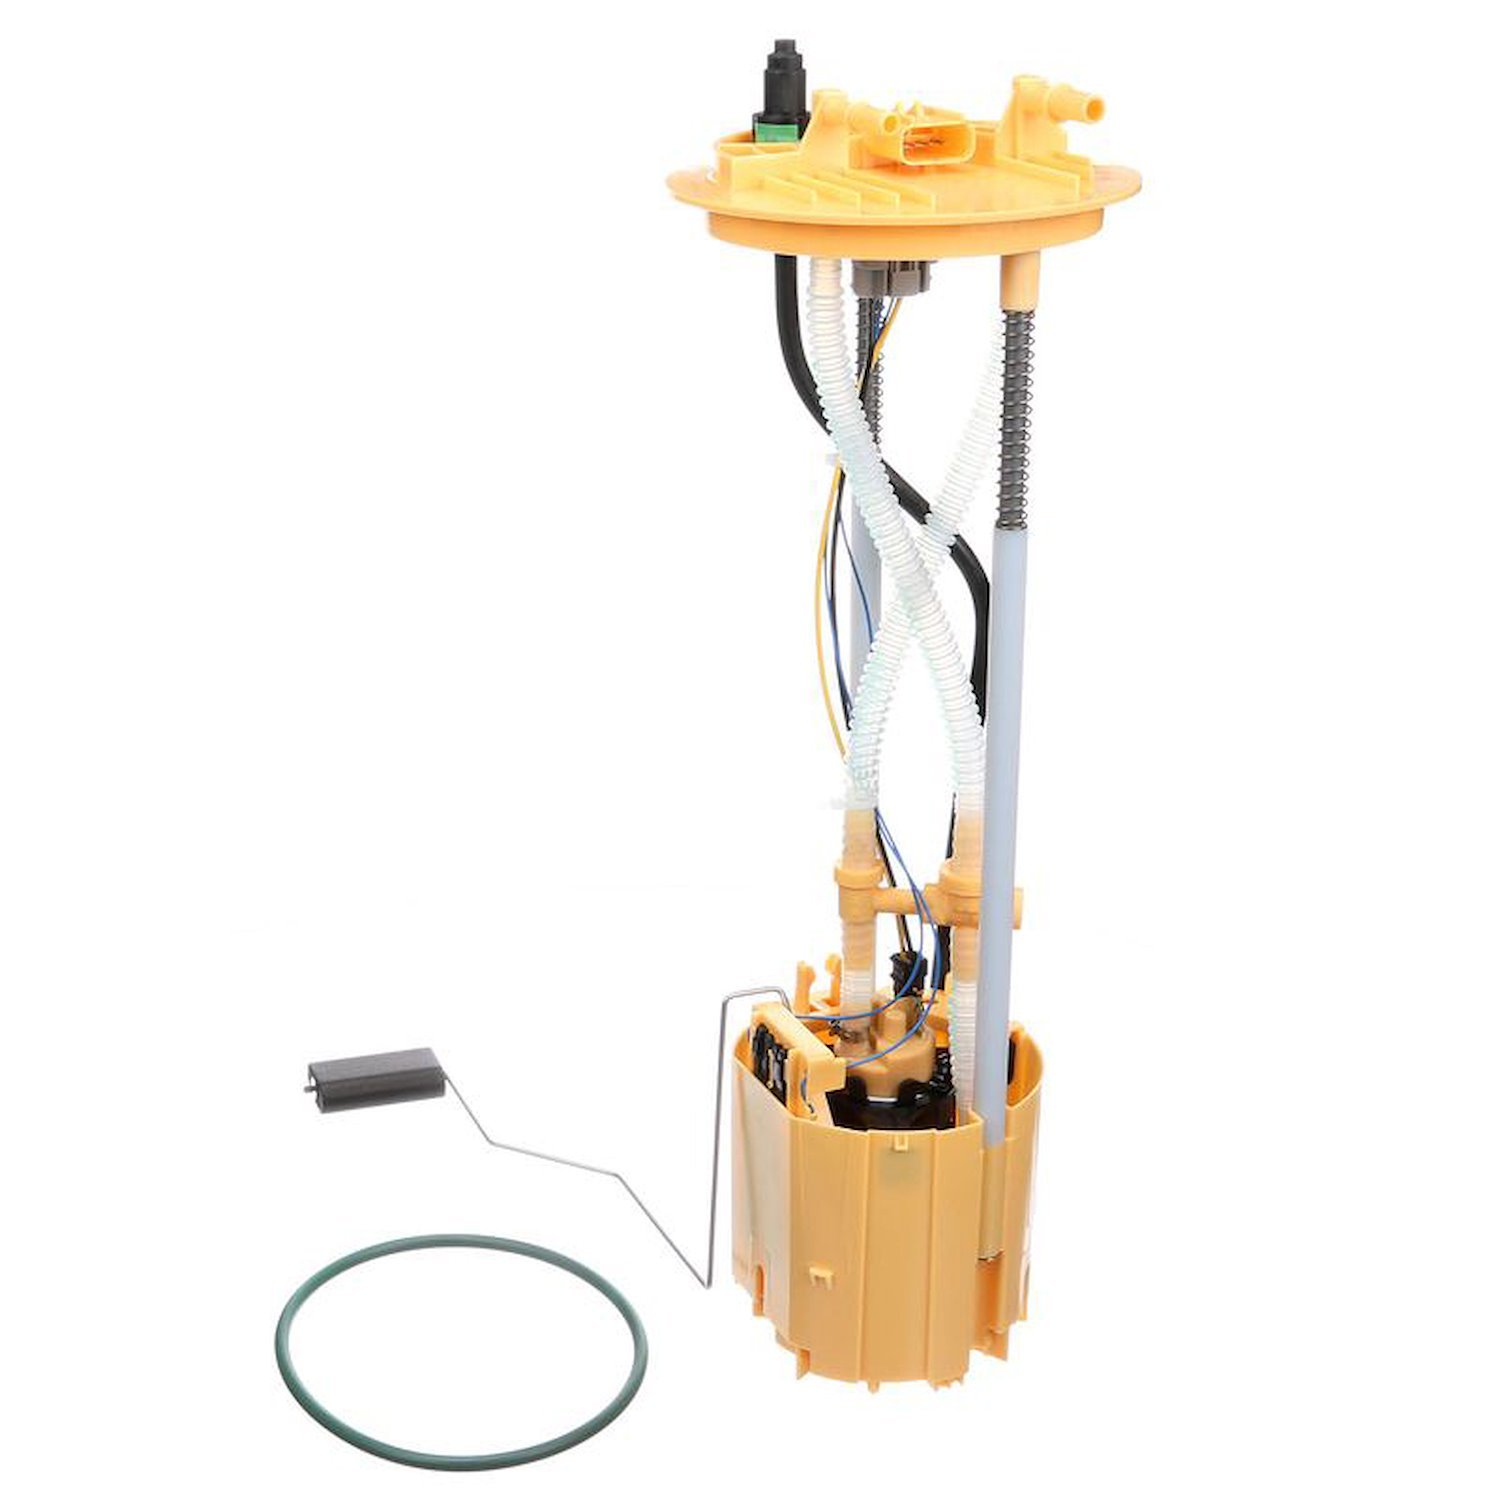 OE Chrysler/Dodge Replacement Fuel Pump Module Assembly for 2007-2010 Dodge Ram 3500/2008-2010 Dodge Ram 4500/5500